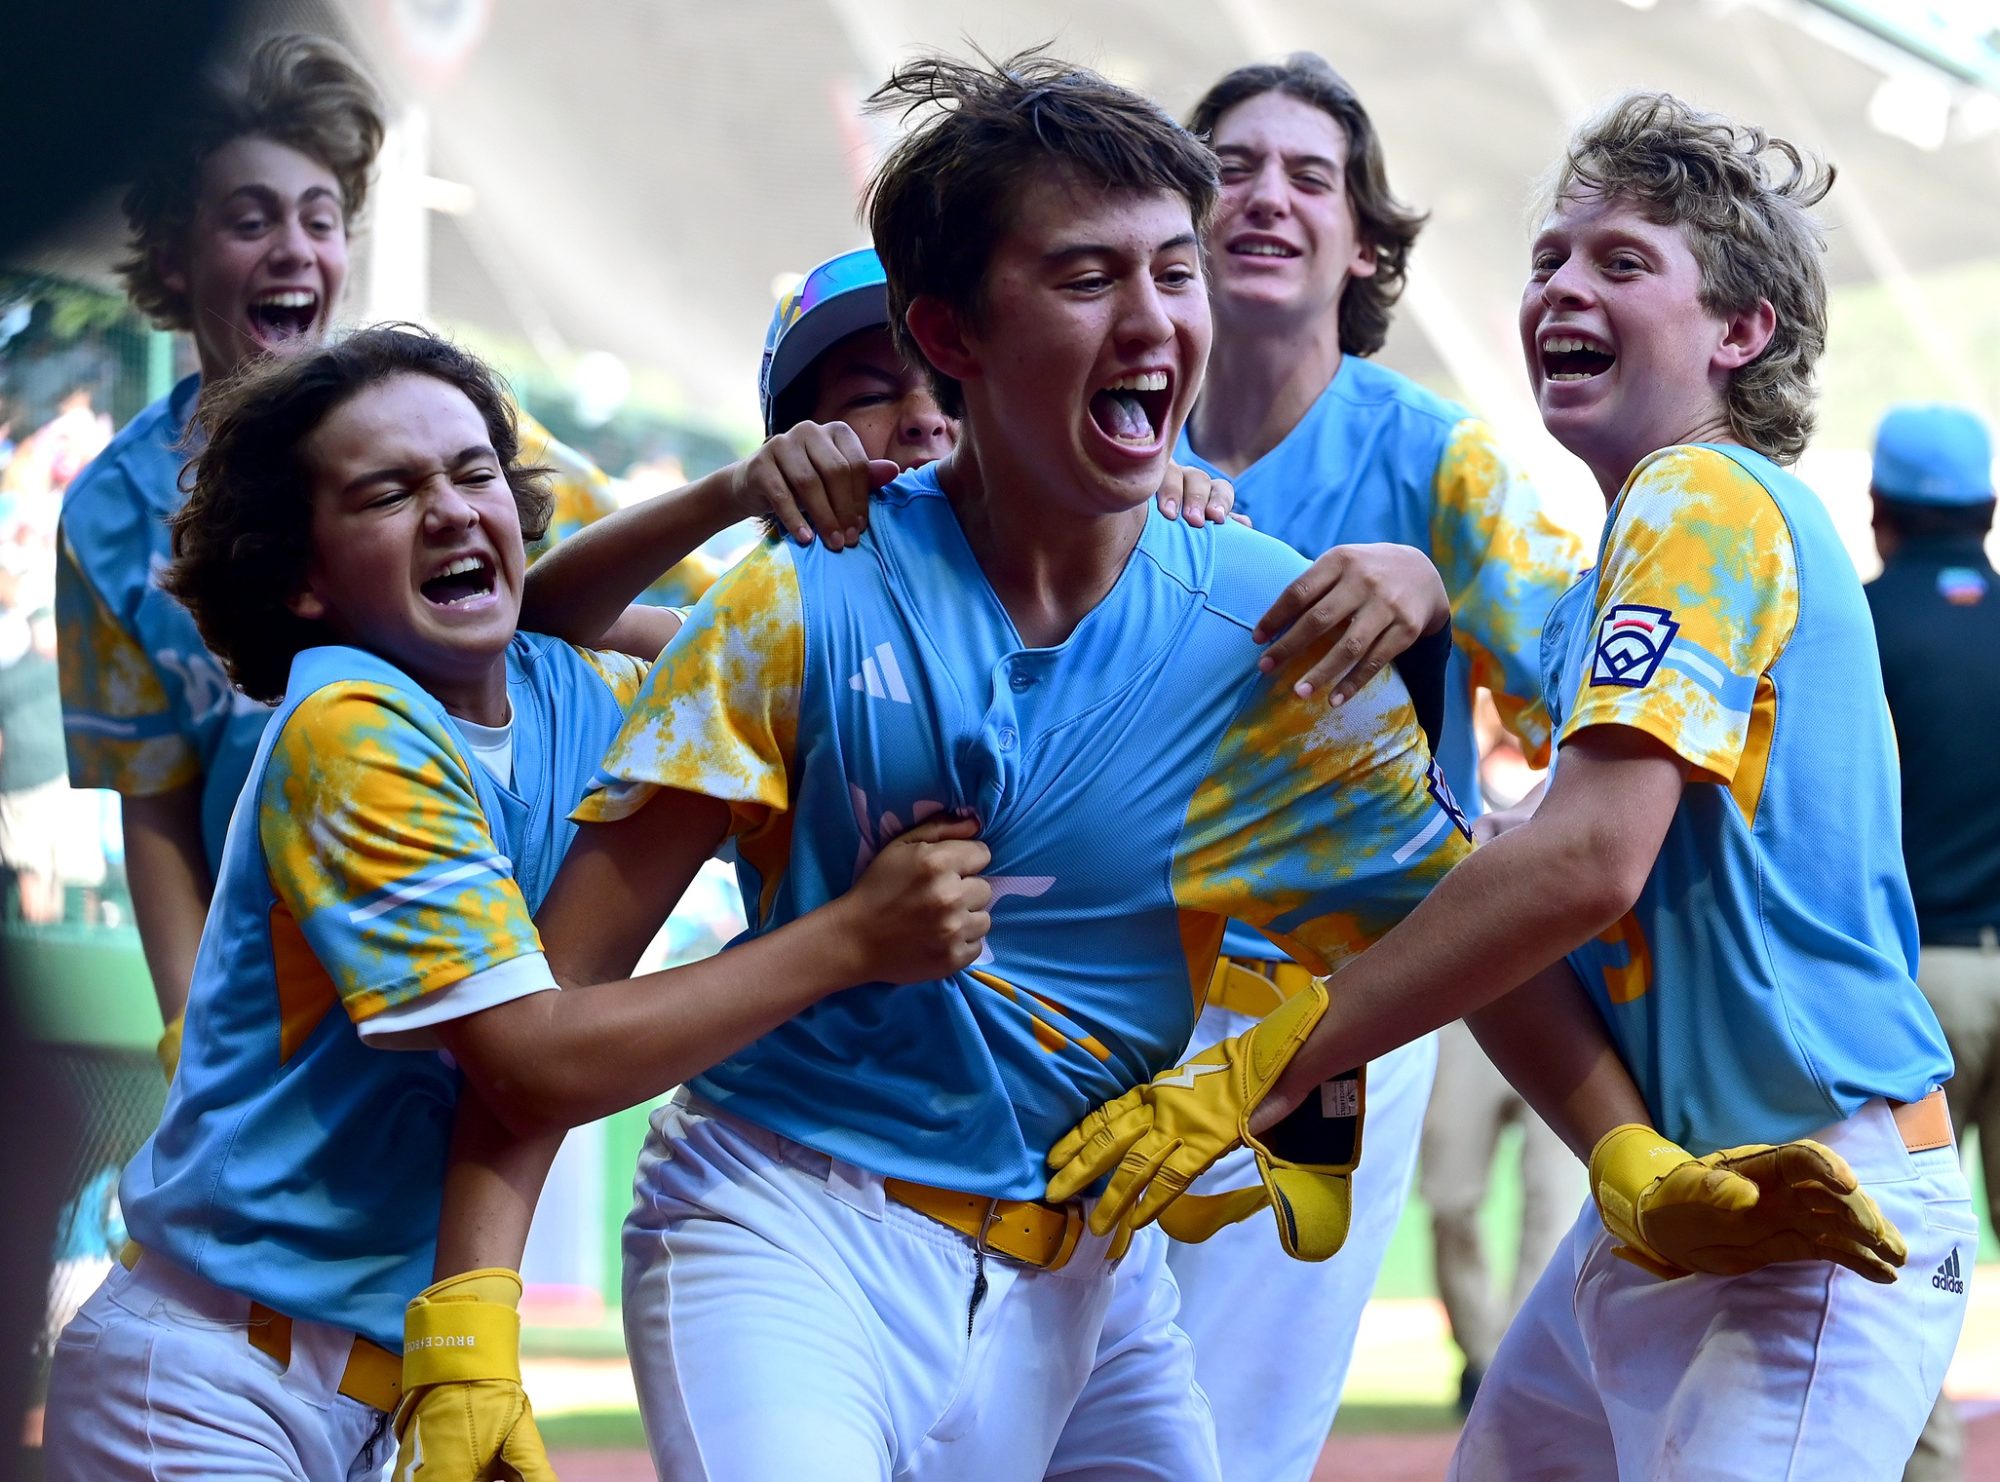 Little League World Series viewership increased 22% over last year's tournament.